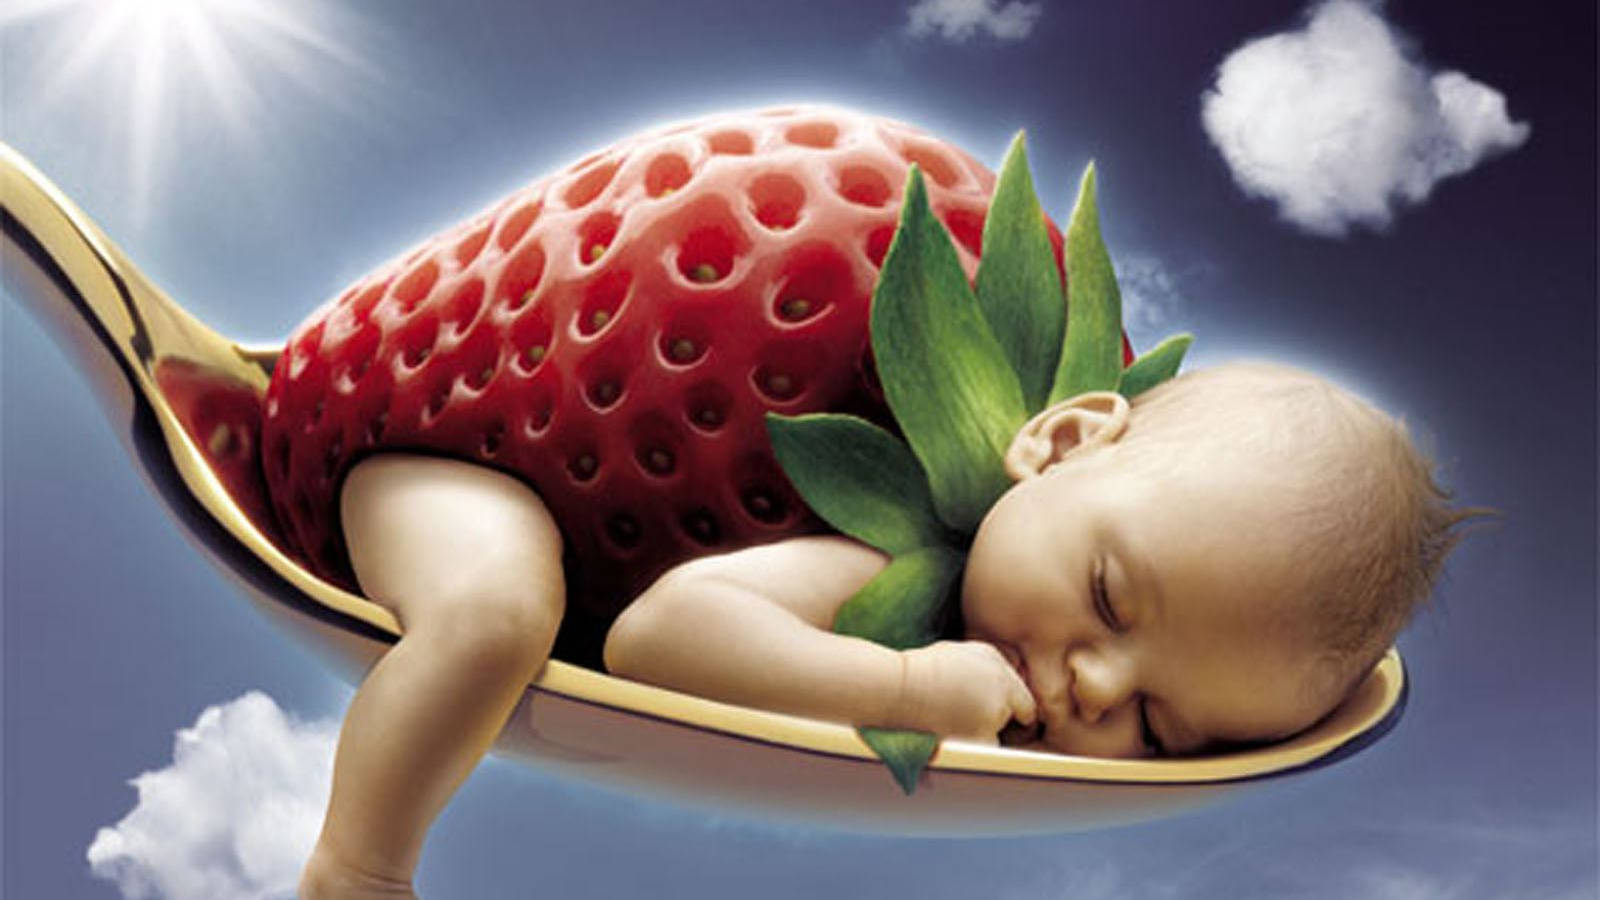 Adorable Baby In A Strawberry Outfit Laughing Joyously